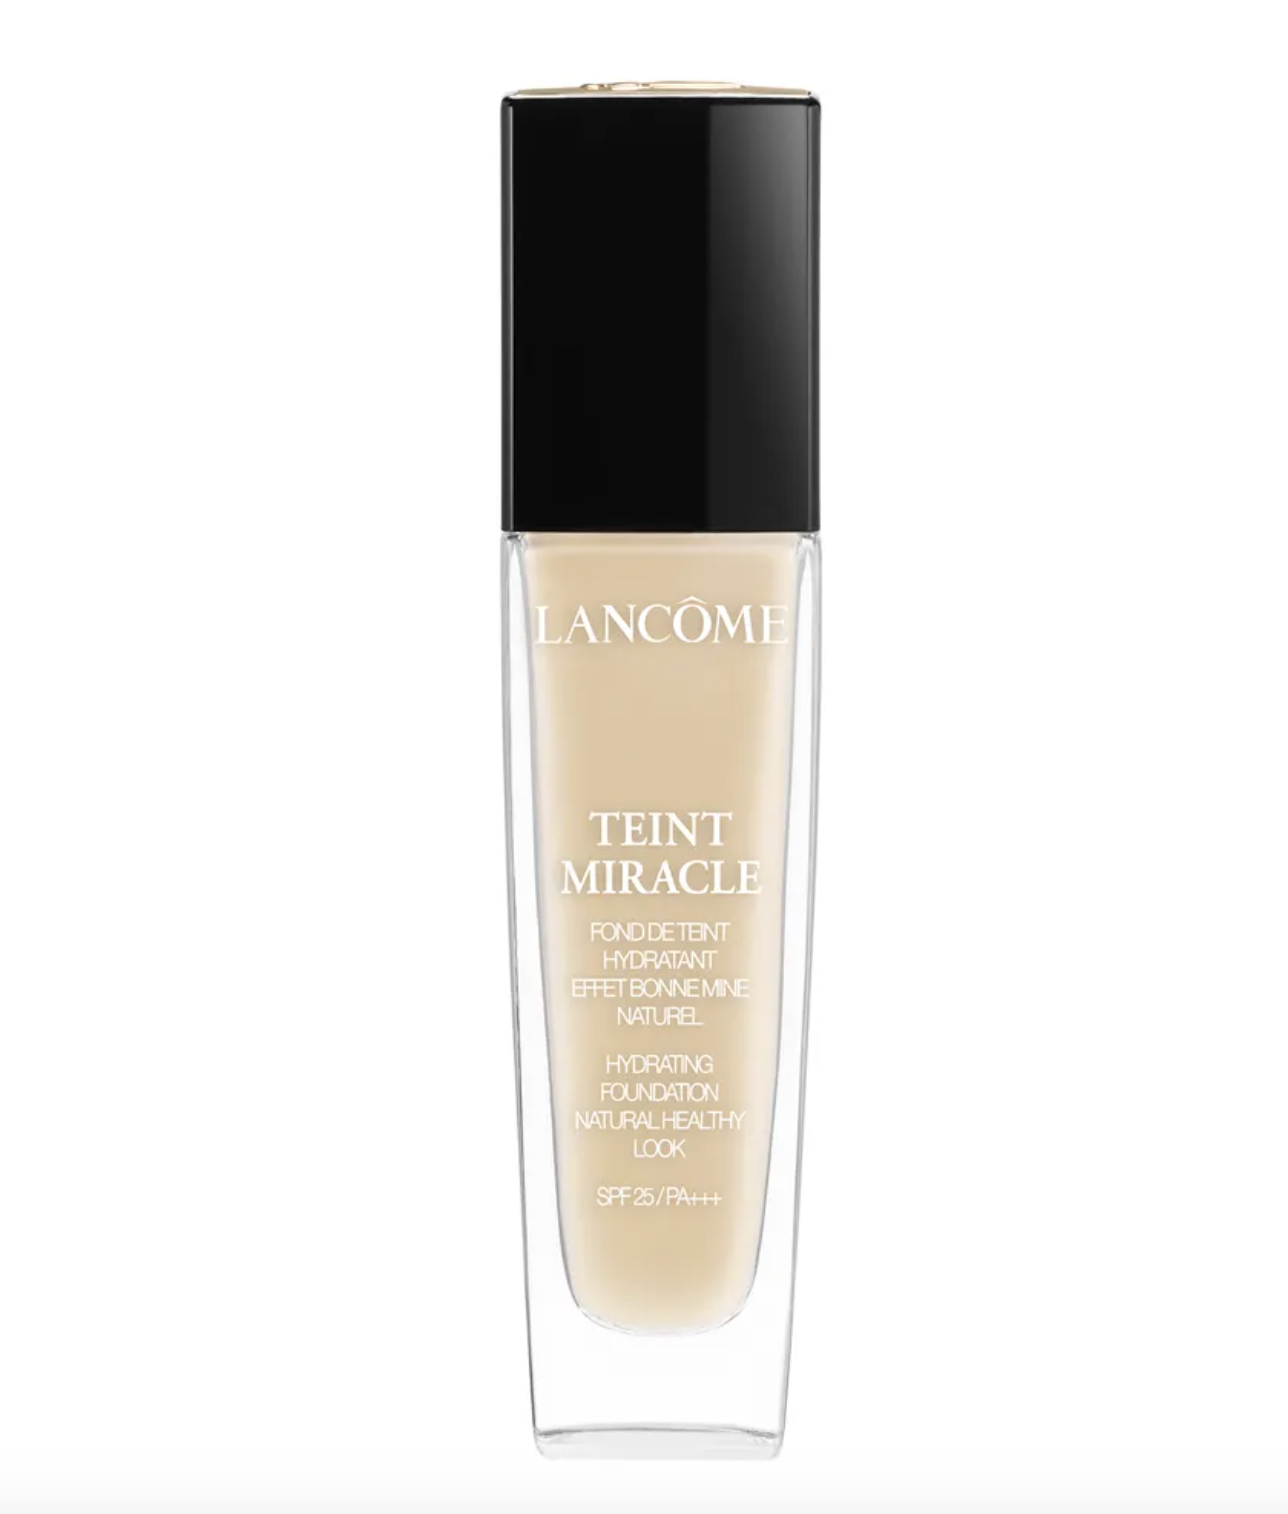 Lancome Teint Miracle Hydrating Foundation SPF 25 / PA+++ $455